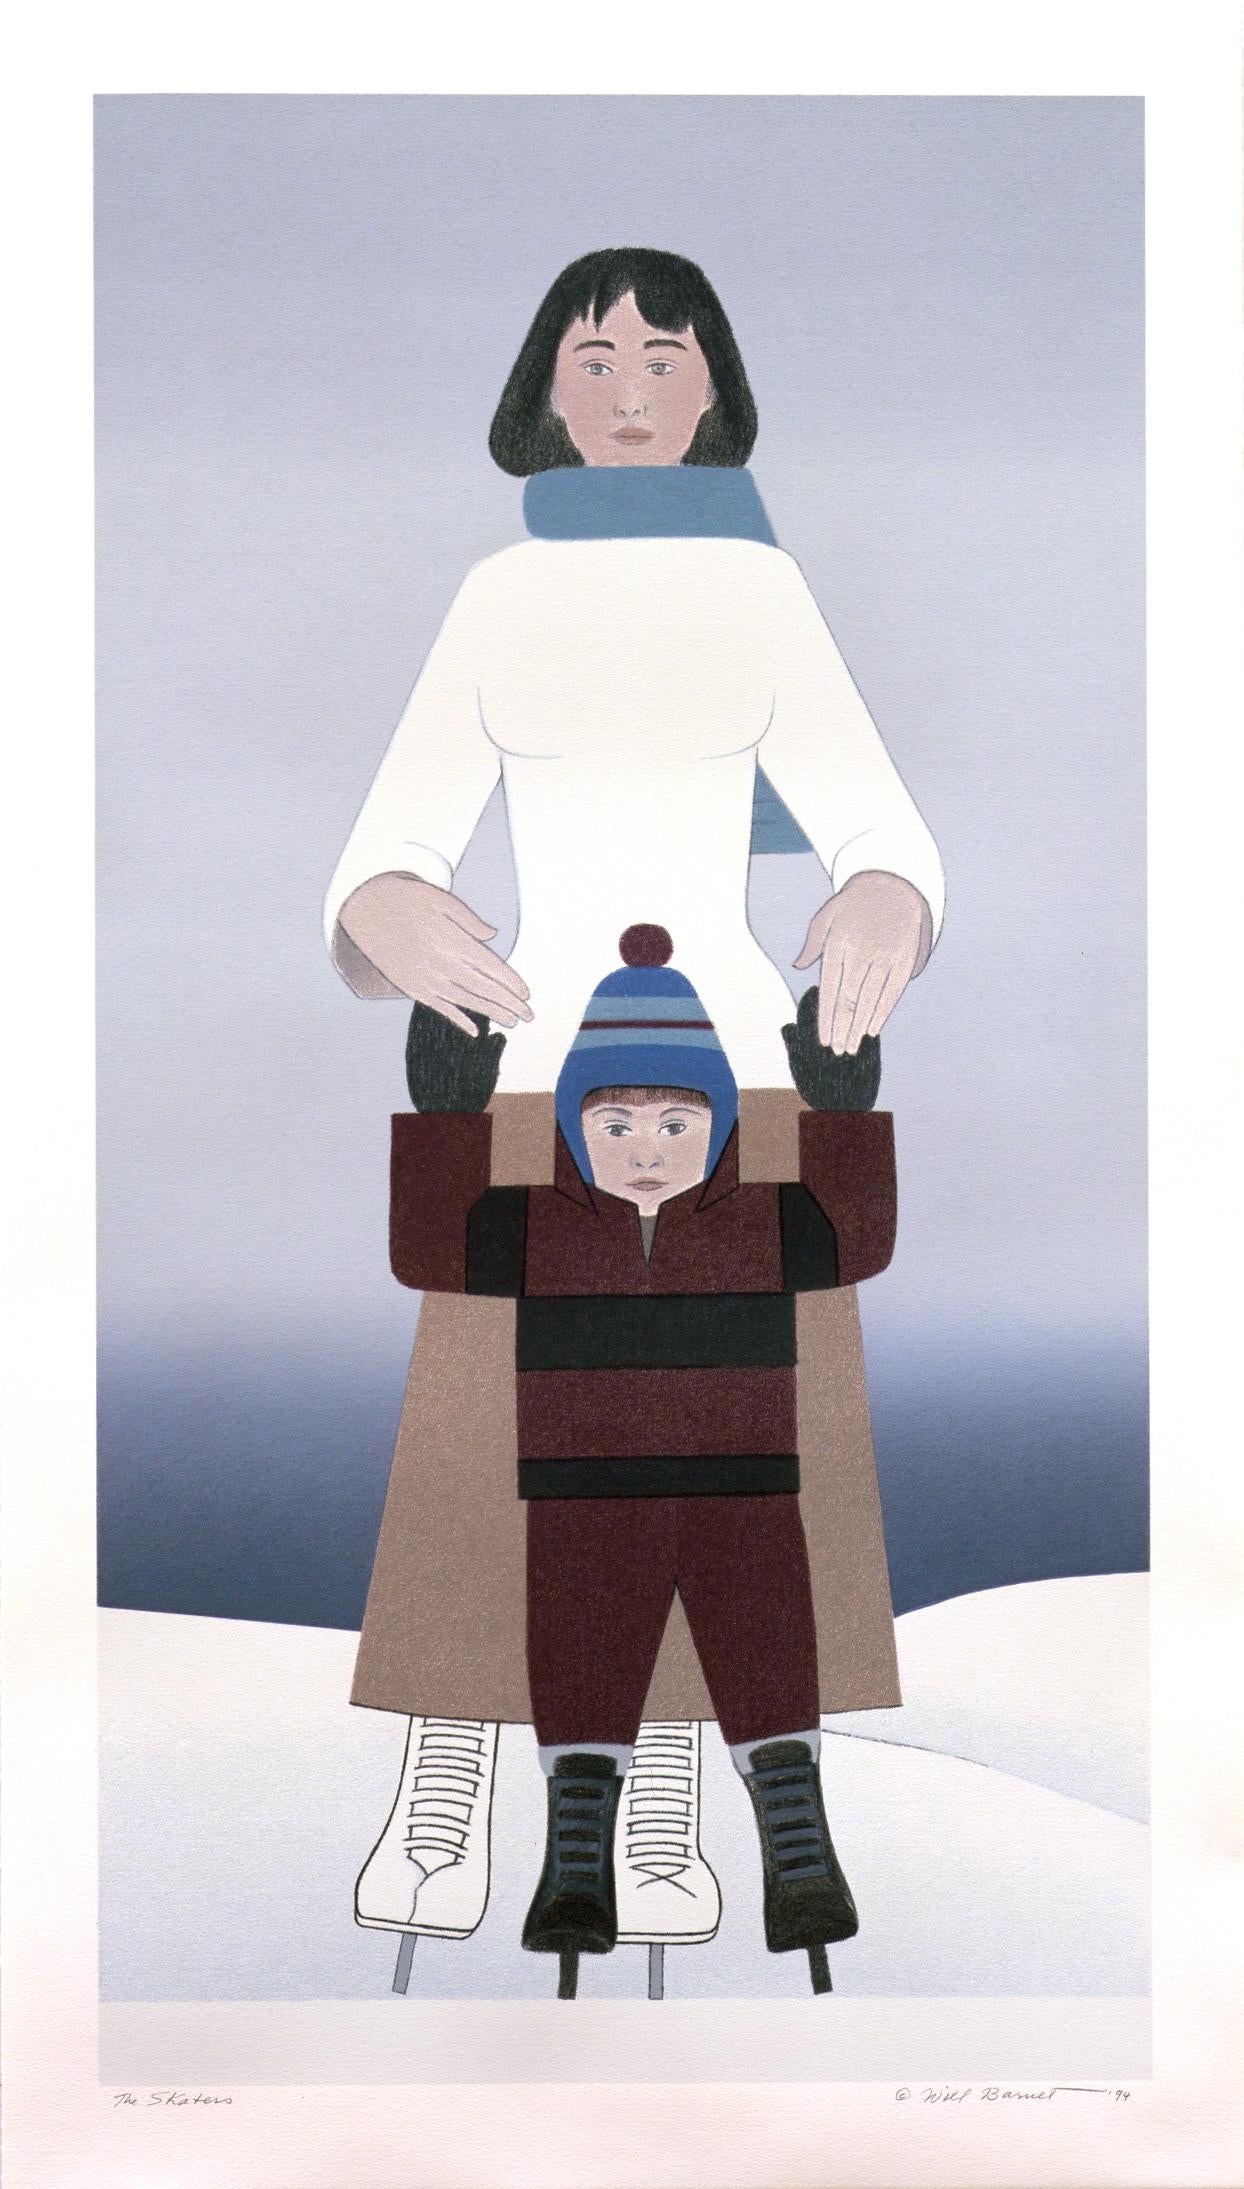 The Skaters, By Will Barnet (screenprint of woman and child ice skating)